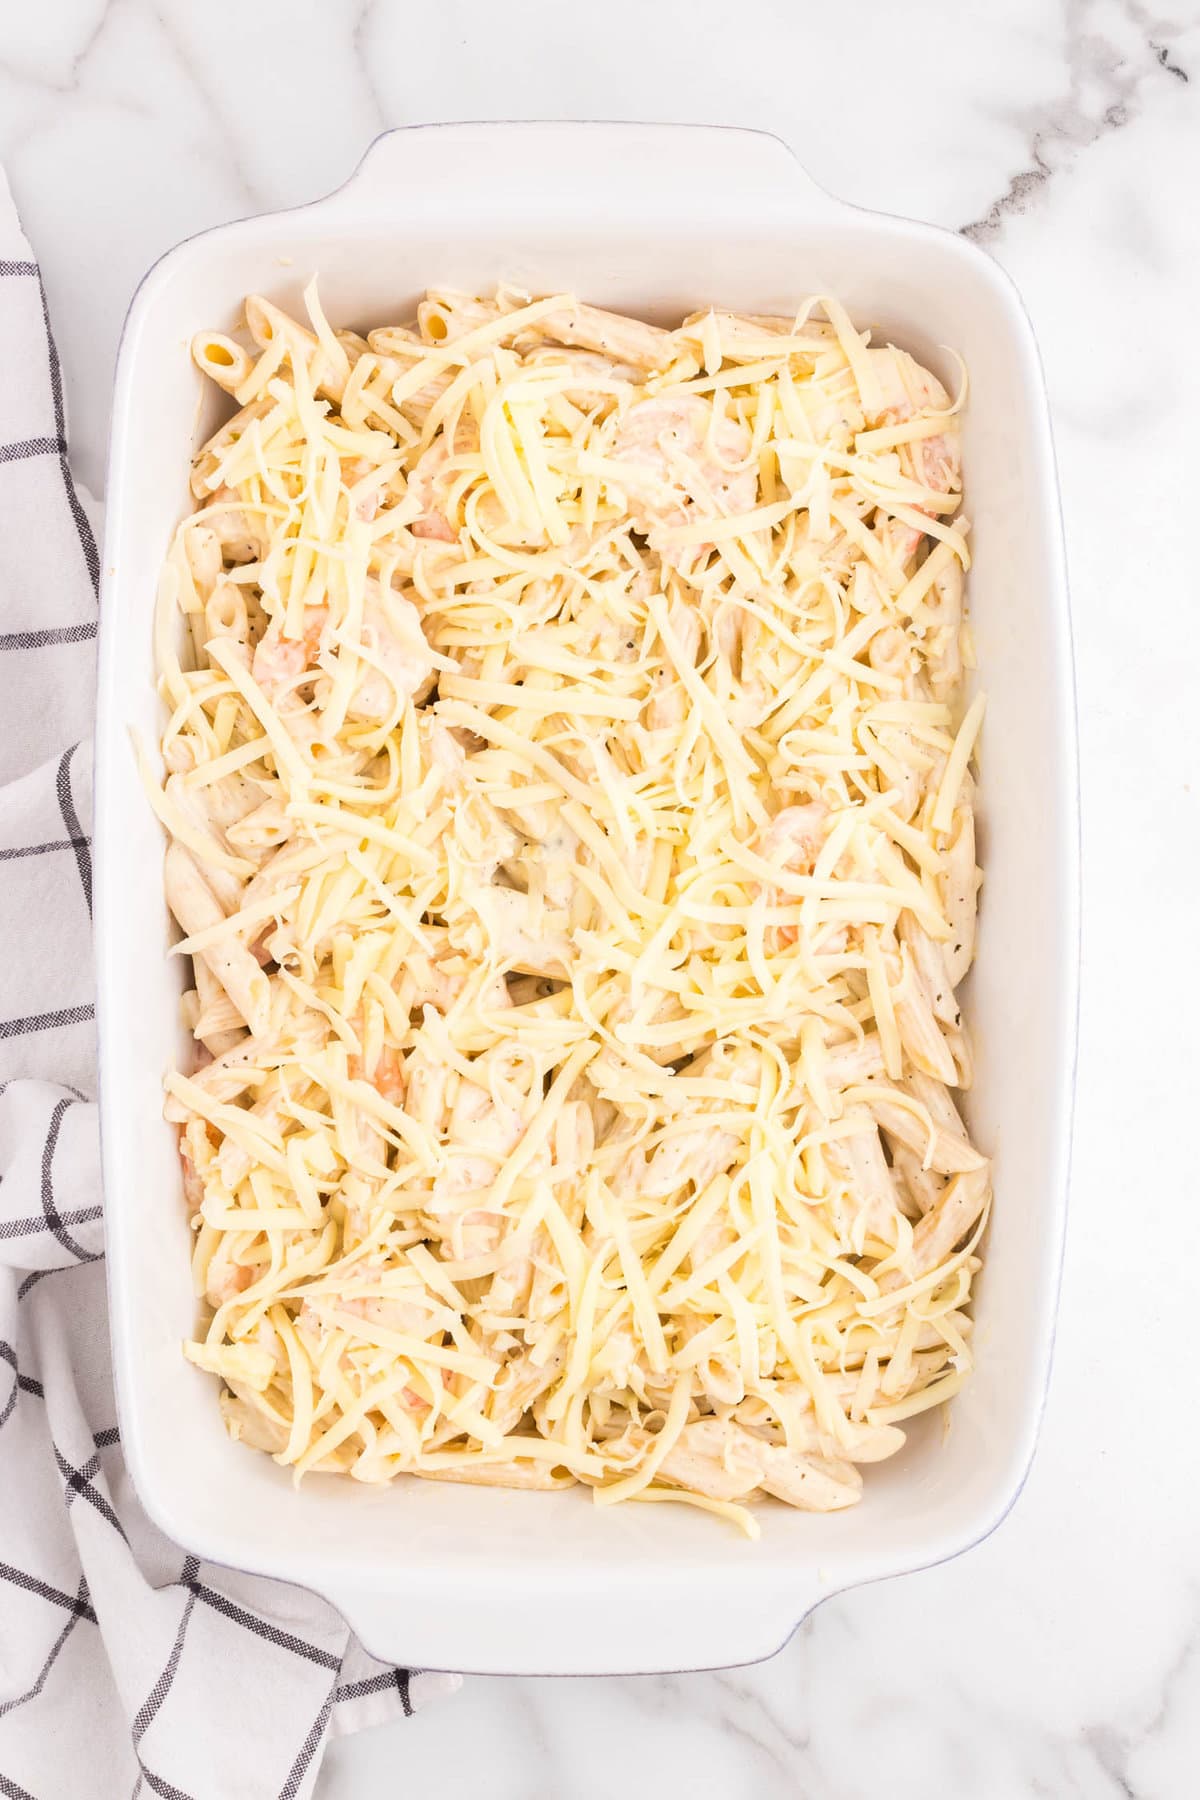 Shrimp Alfredo Bake in 9x13 baking dish topped with cheese